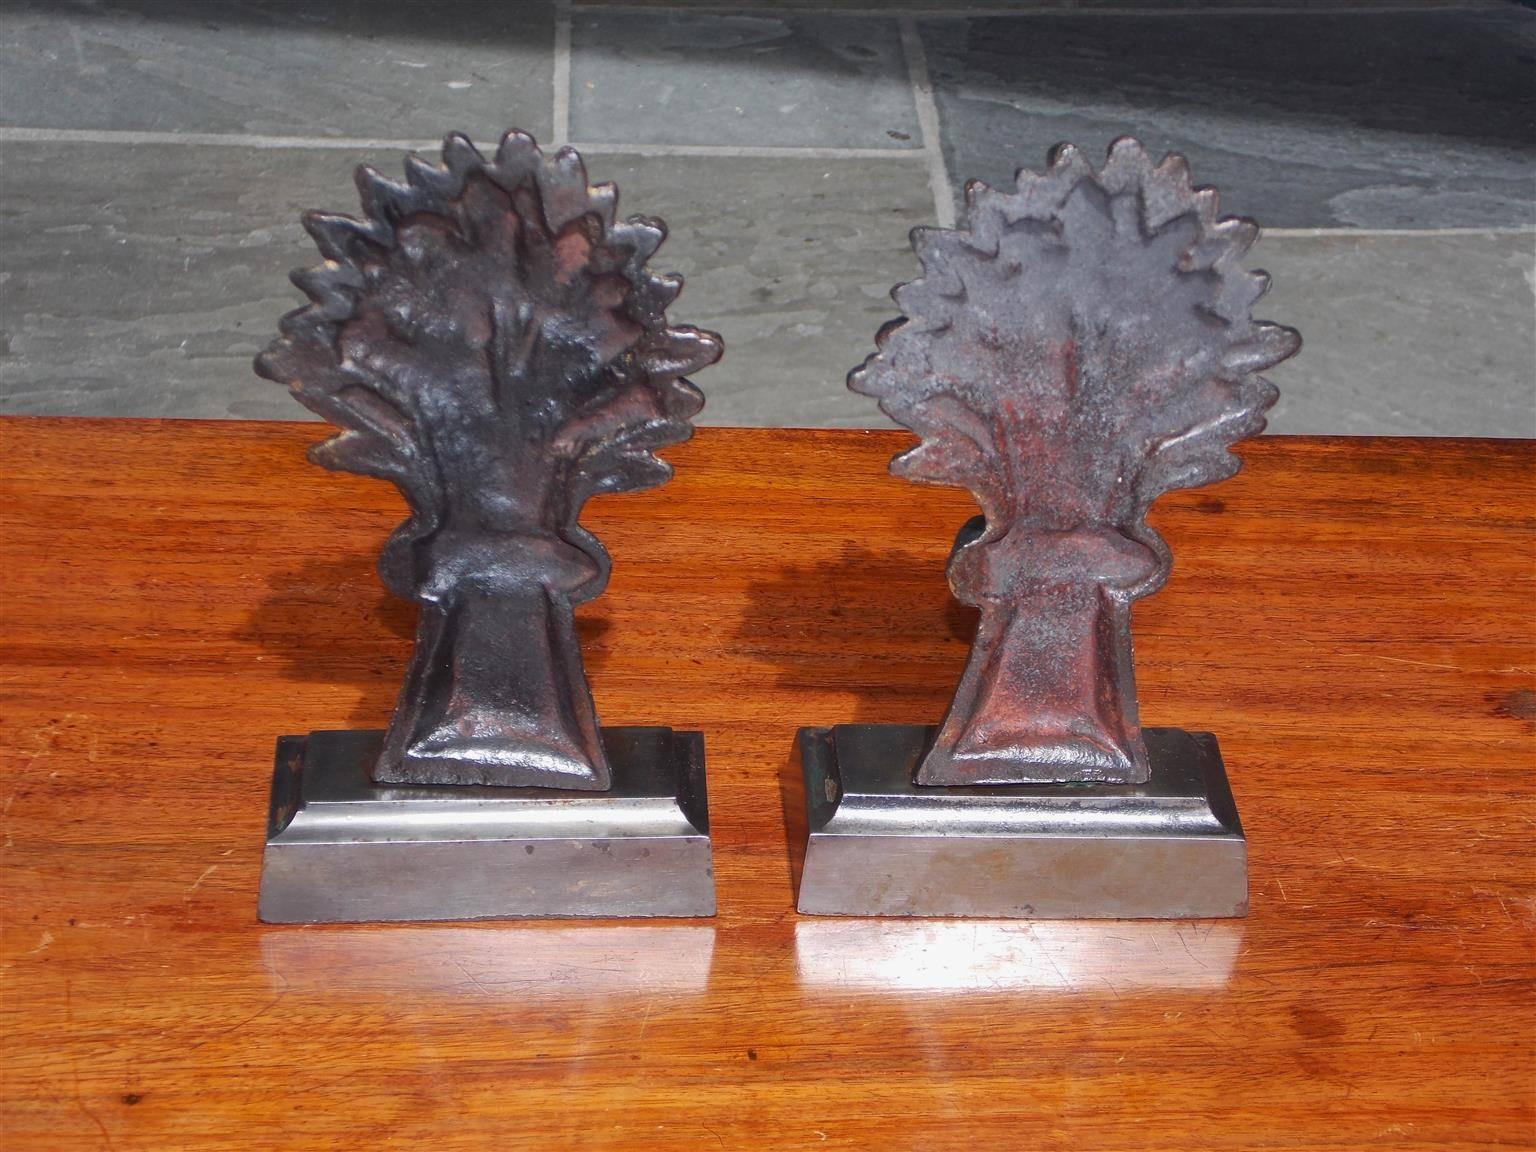 Cast Pair of English Polished Steel Wheat Sheaths Book Ends, Circa 1840 For Sale